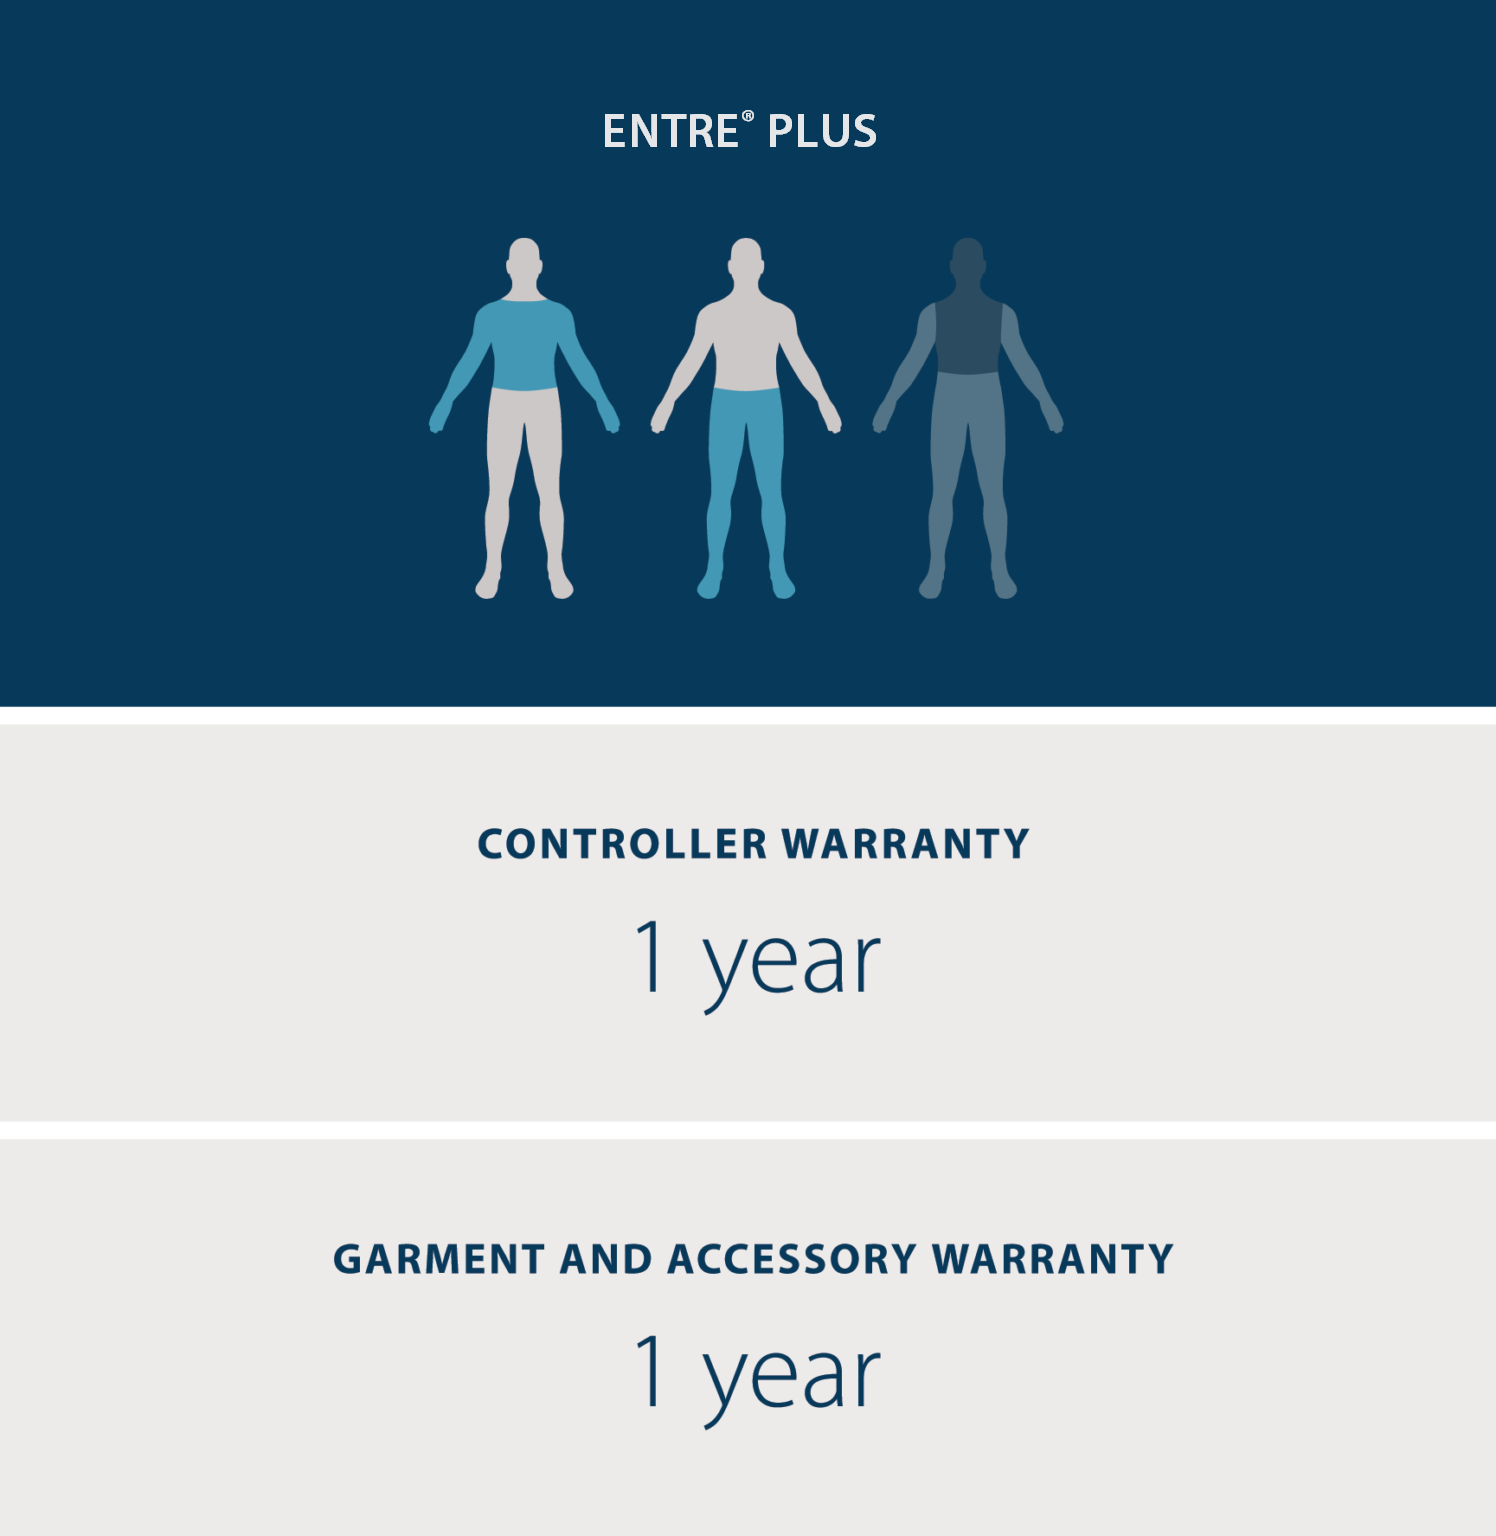 entre plus warranty controller warranty is one year. garment and accessory warranty is one year.